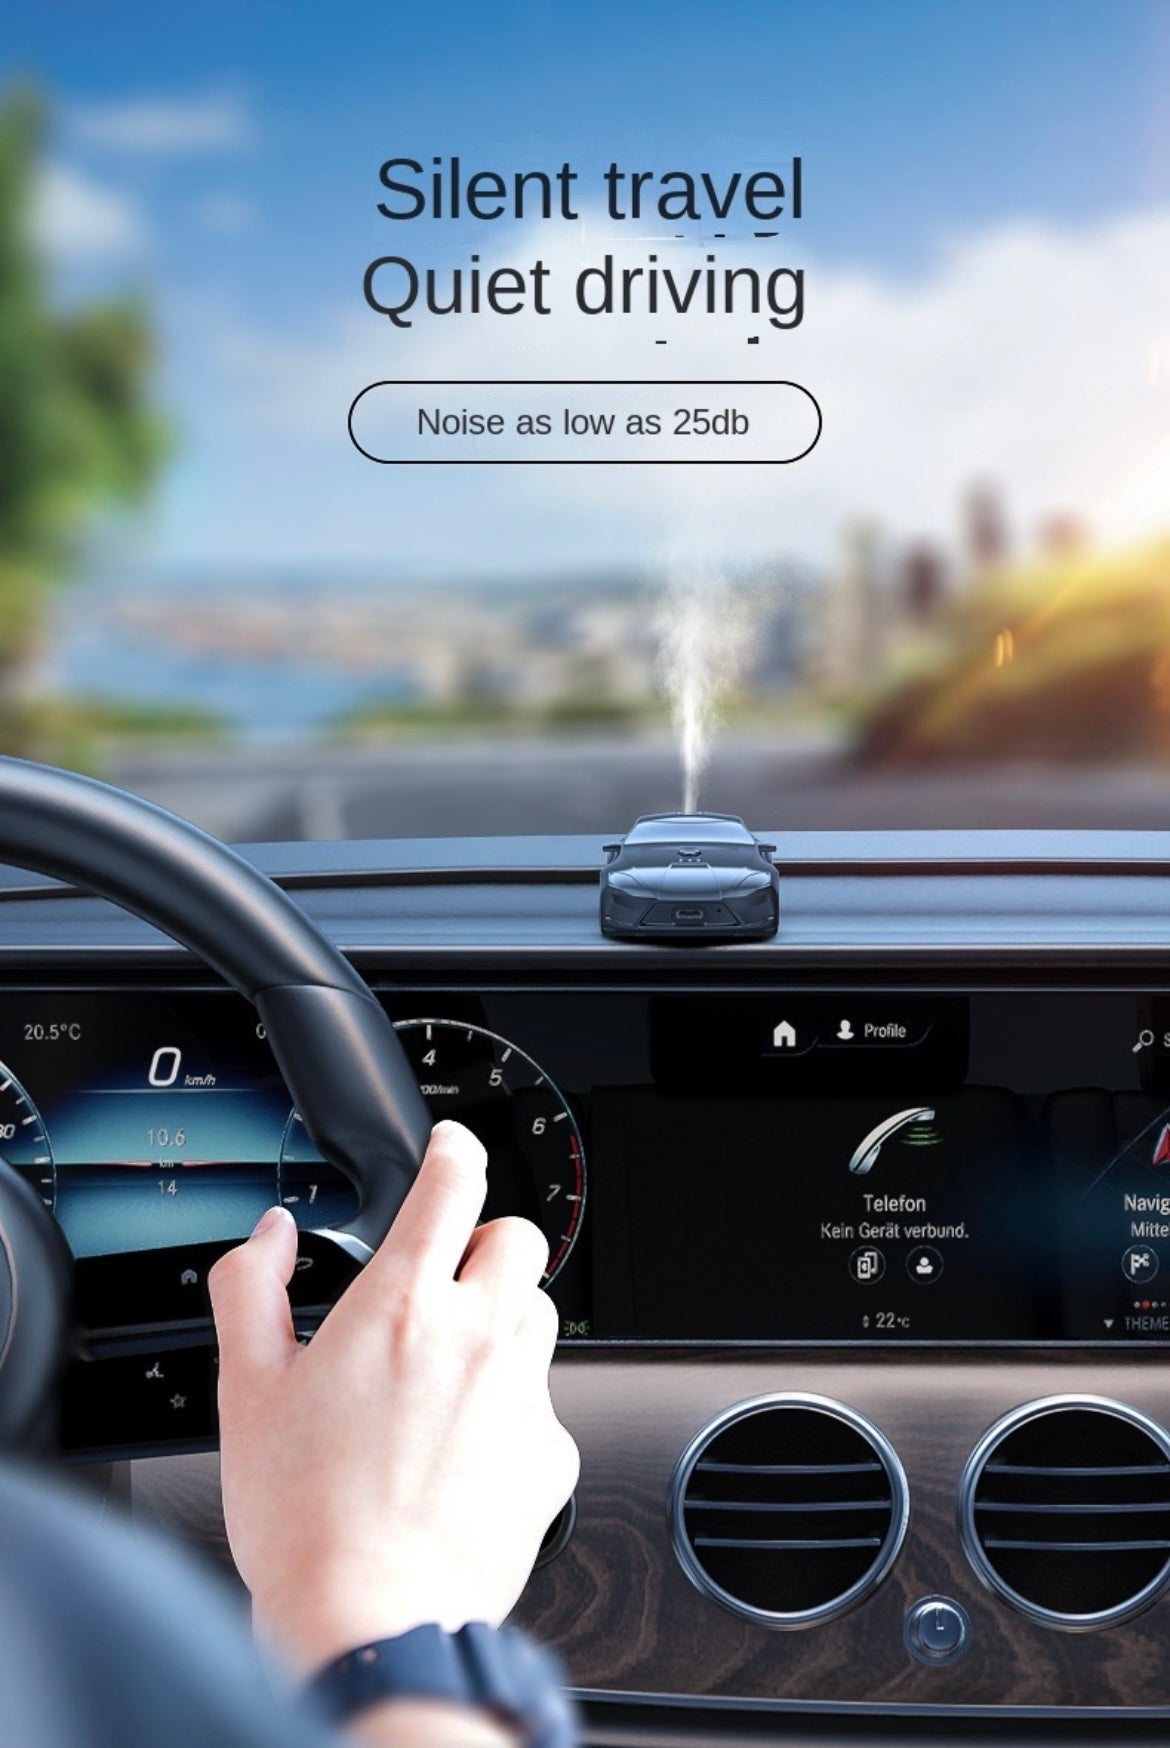 Smart aromatherapy device for car models1